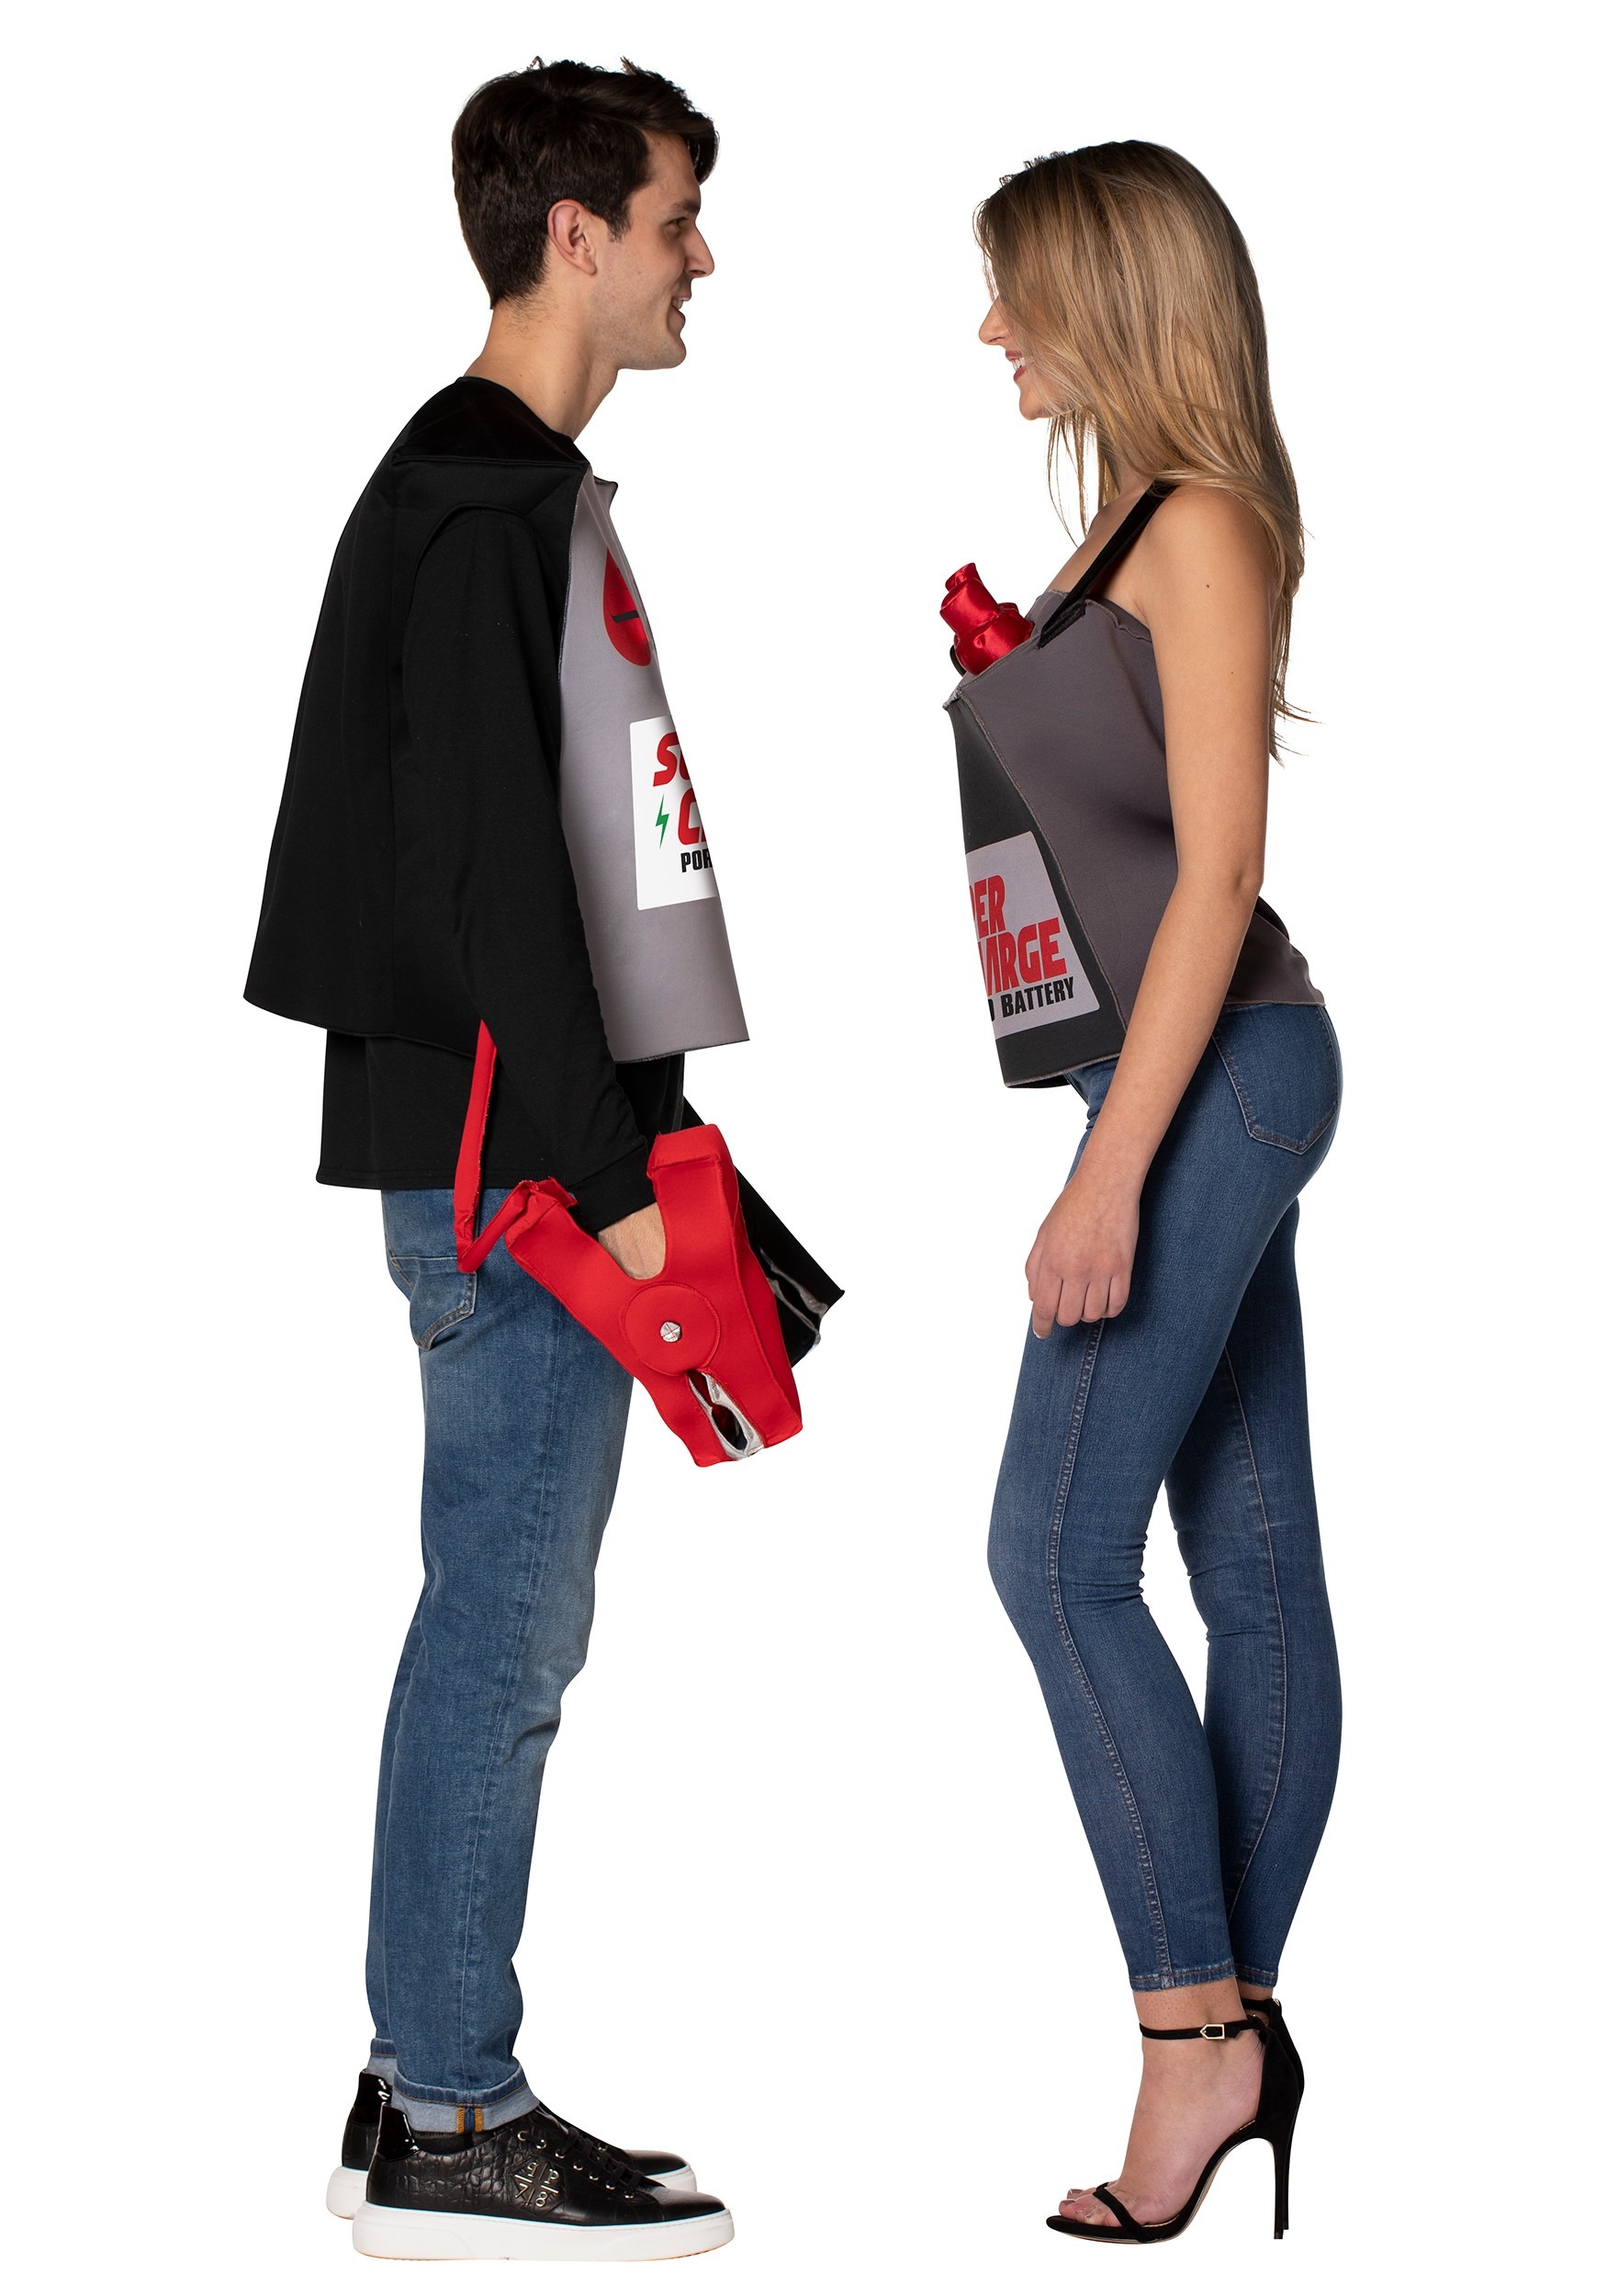 Battery & Jumper Cables Adult Couple's Fancy Dress Costume , Couples Fancy Dress Fancy Dress Costumes For Halloween